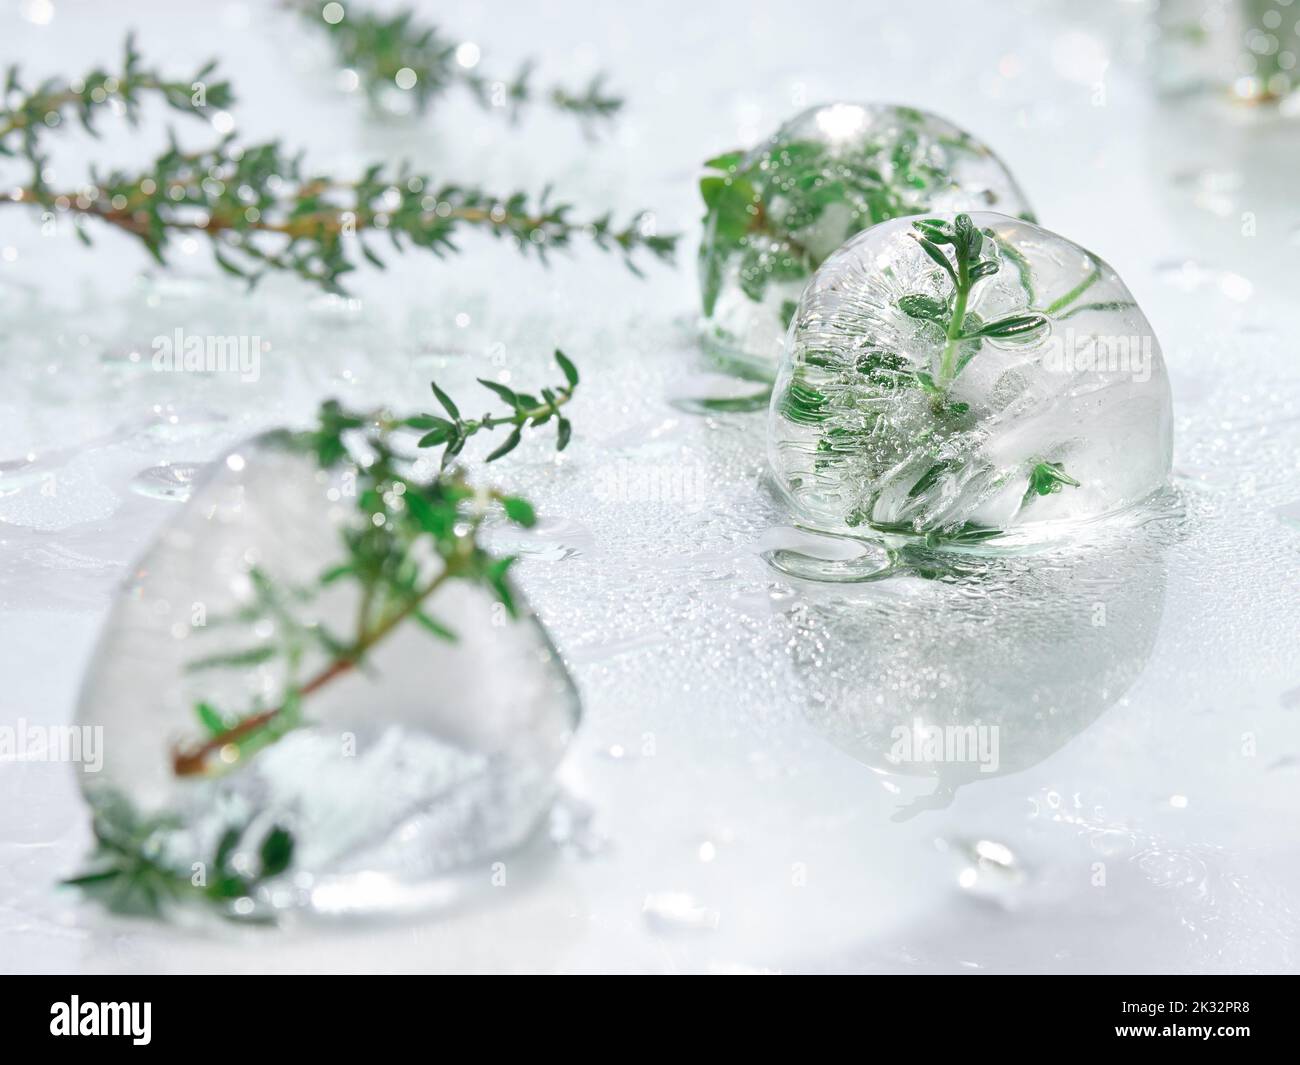 Wet off white water background with melting balls of ice with frozen herbs. Rosemary, oregano and thyme plants. Frozen plants inside pieces of ice. Stock Photo